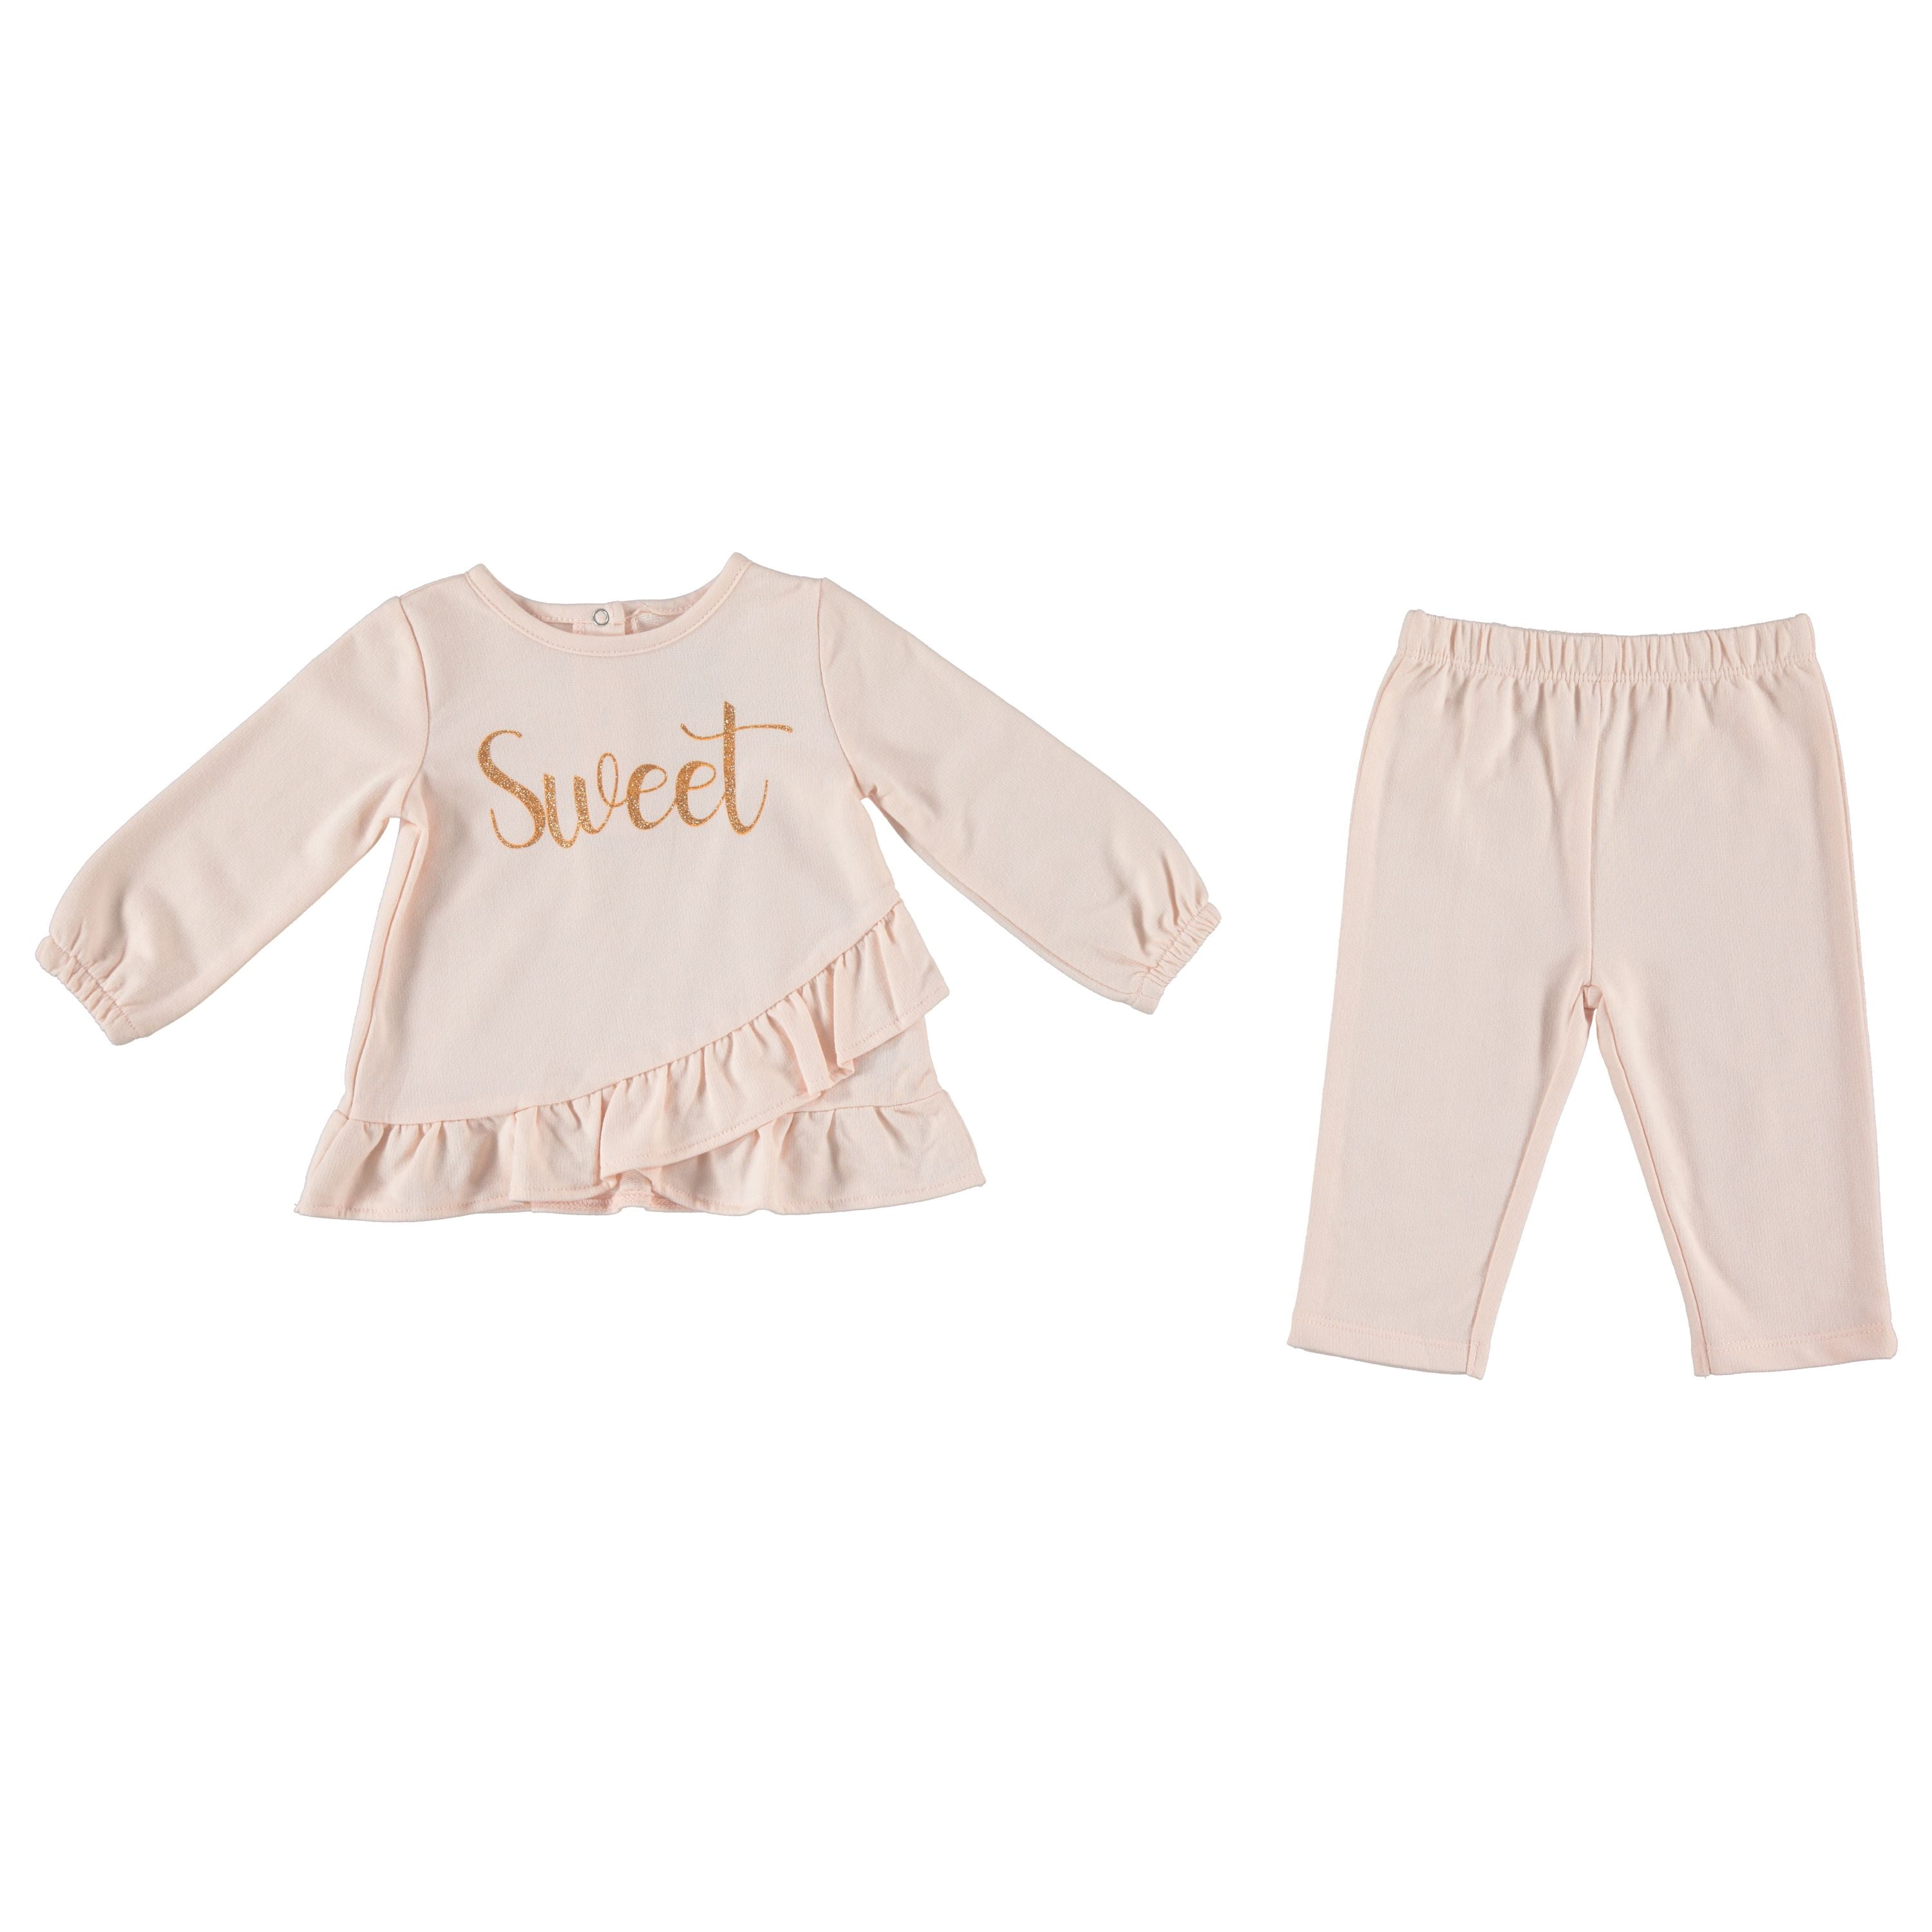 Details about   Juicy Couture Baby Girl 3 Piece Tank Top Bodysuit Set ~Coral White & Mint Green 